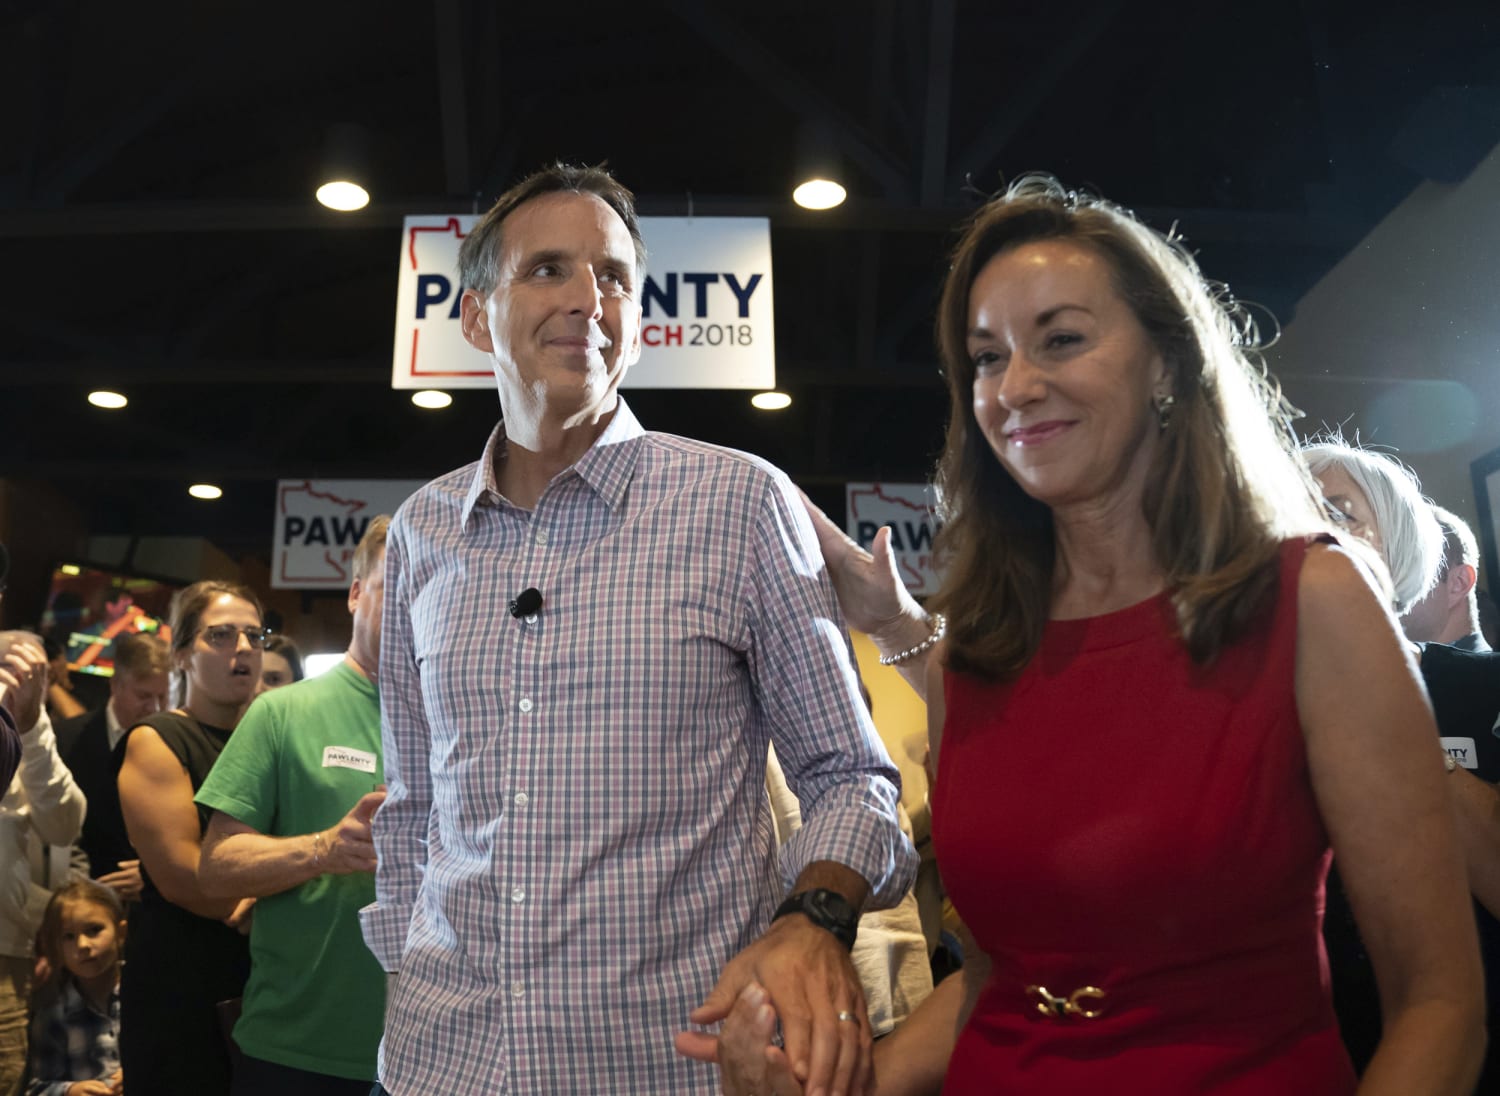 Dwell klasse missil Tim Pawlenty goes down and six takeaways from Tuesday's primaries